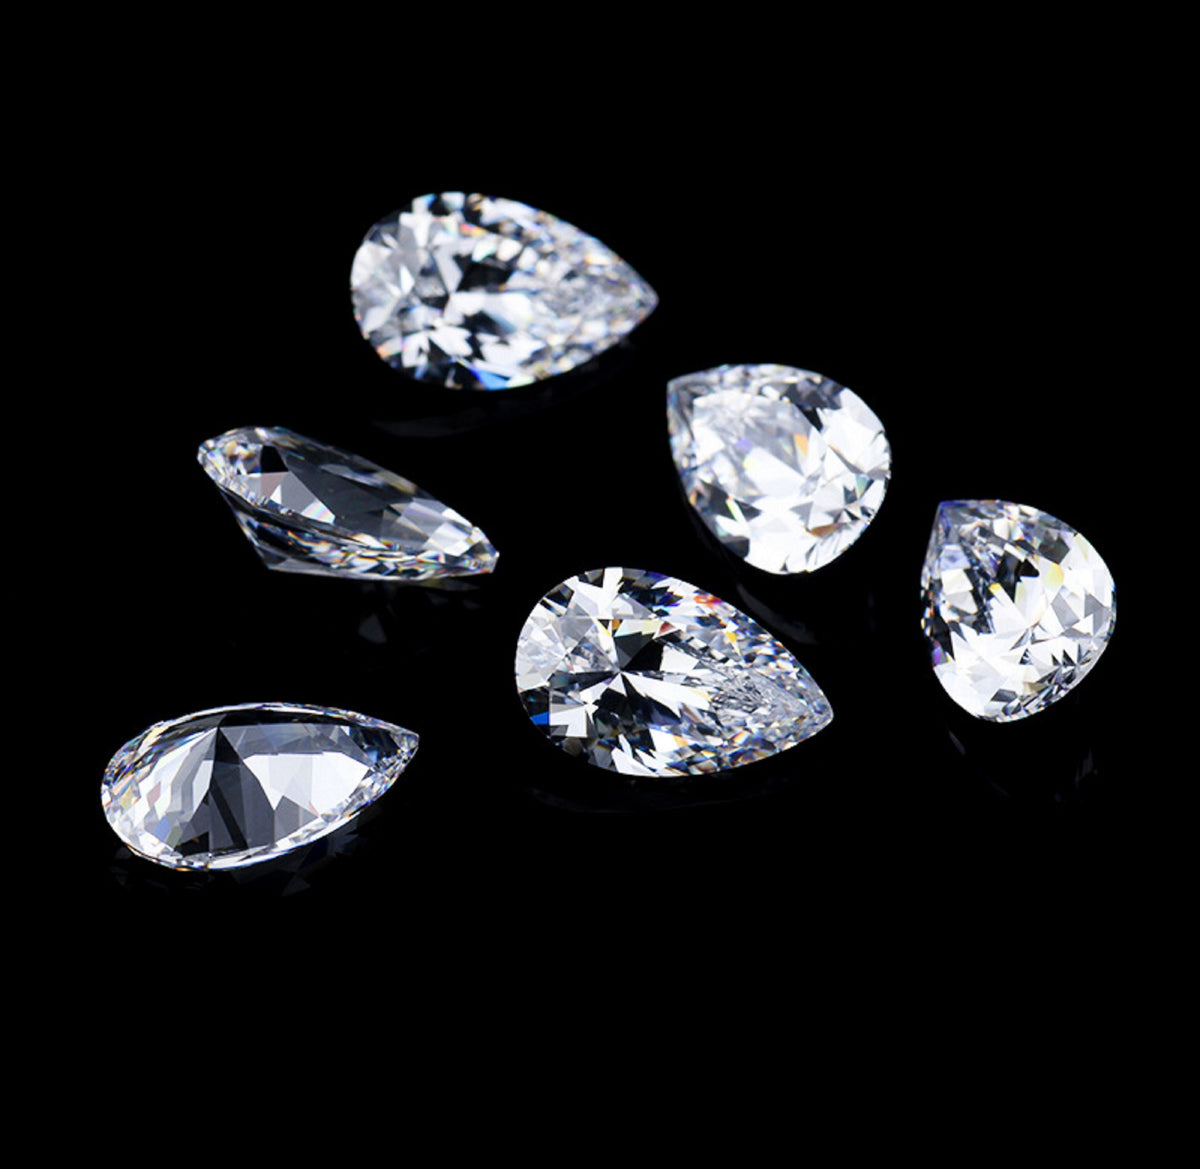 Cubic Zirconia: The Affordable and Beautiful Alternative to Diamonds